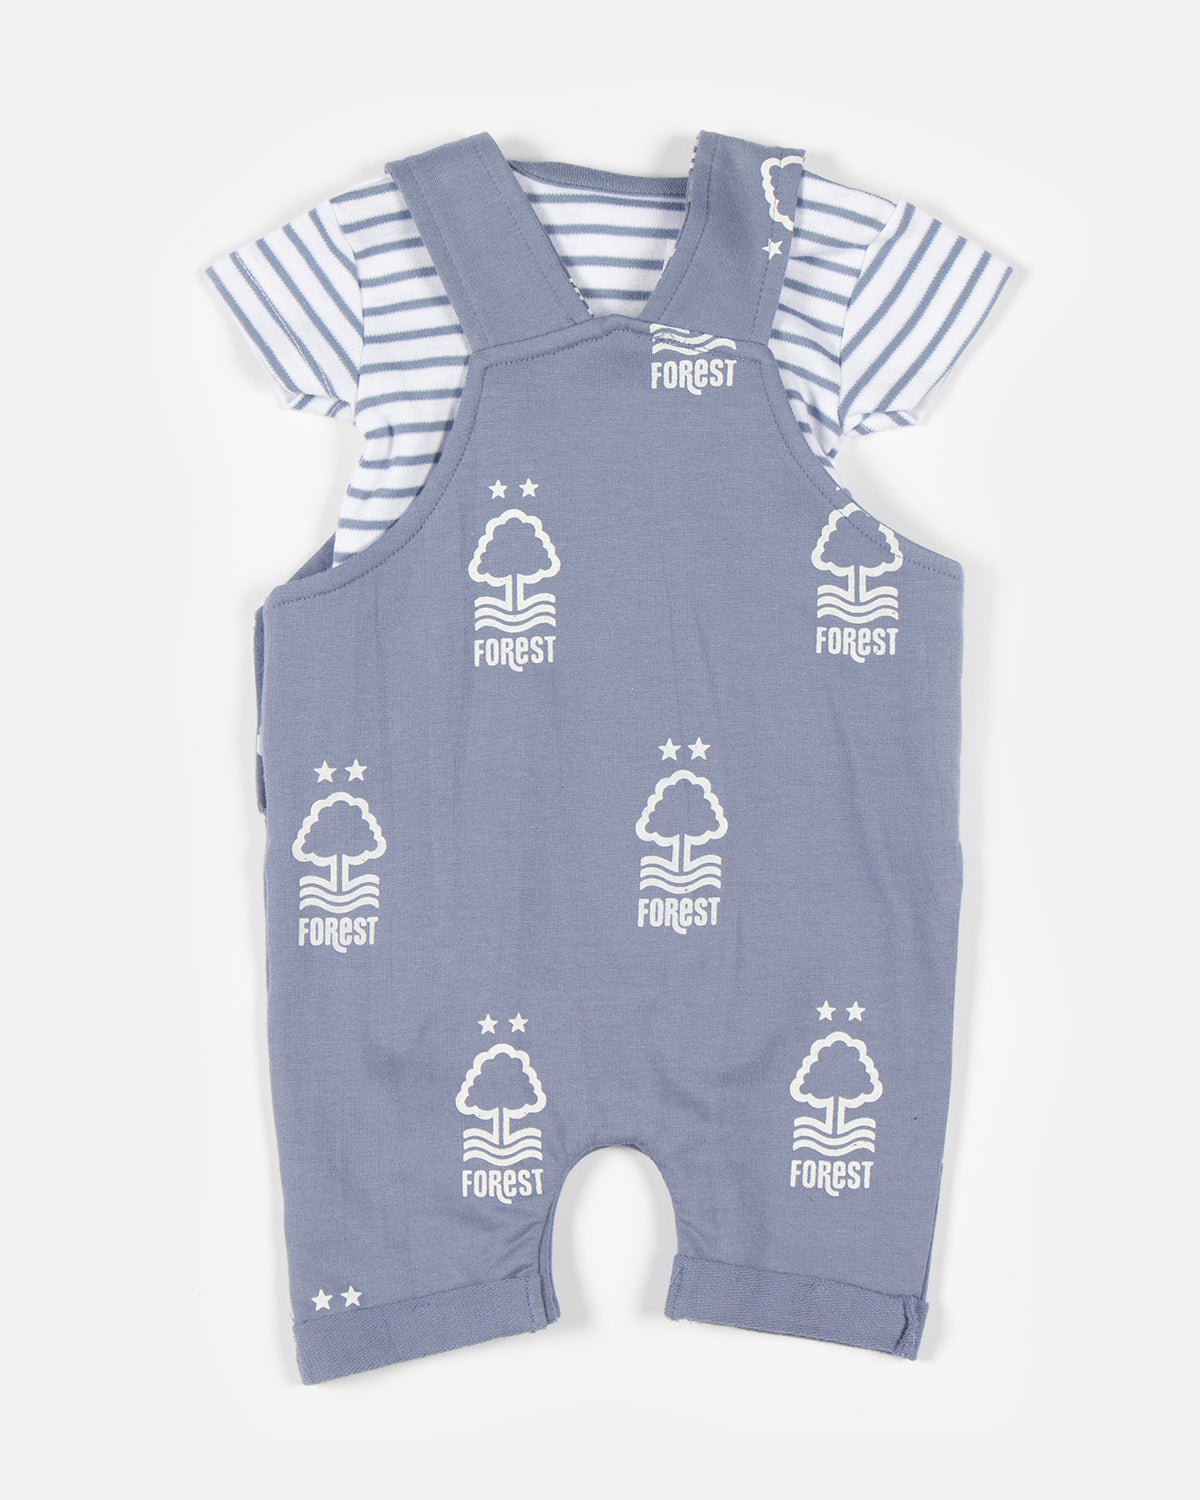 NFFC Blue Remy Dungarees - Nottingham Forest FC